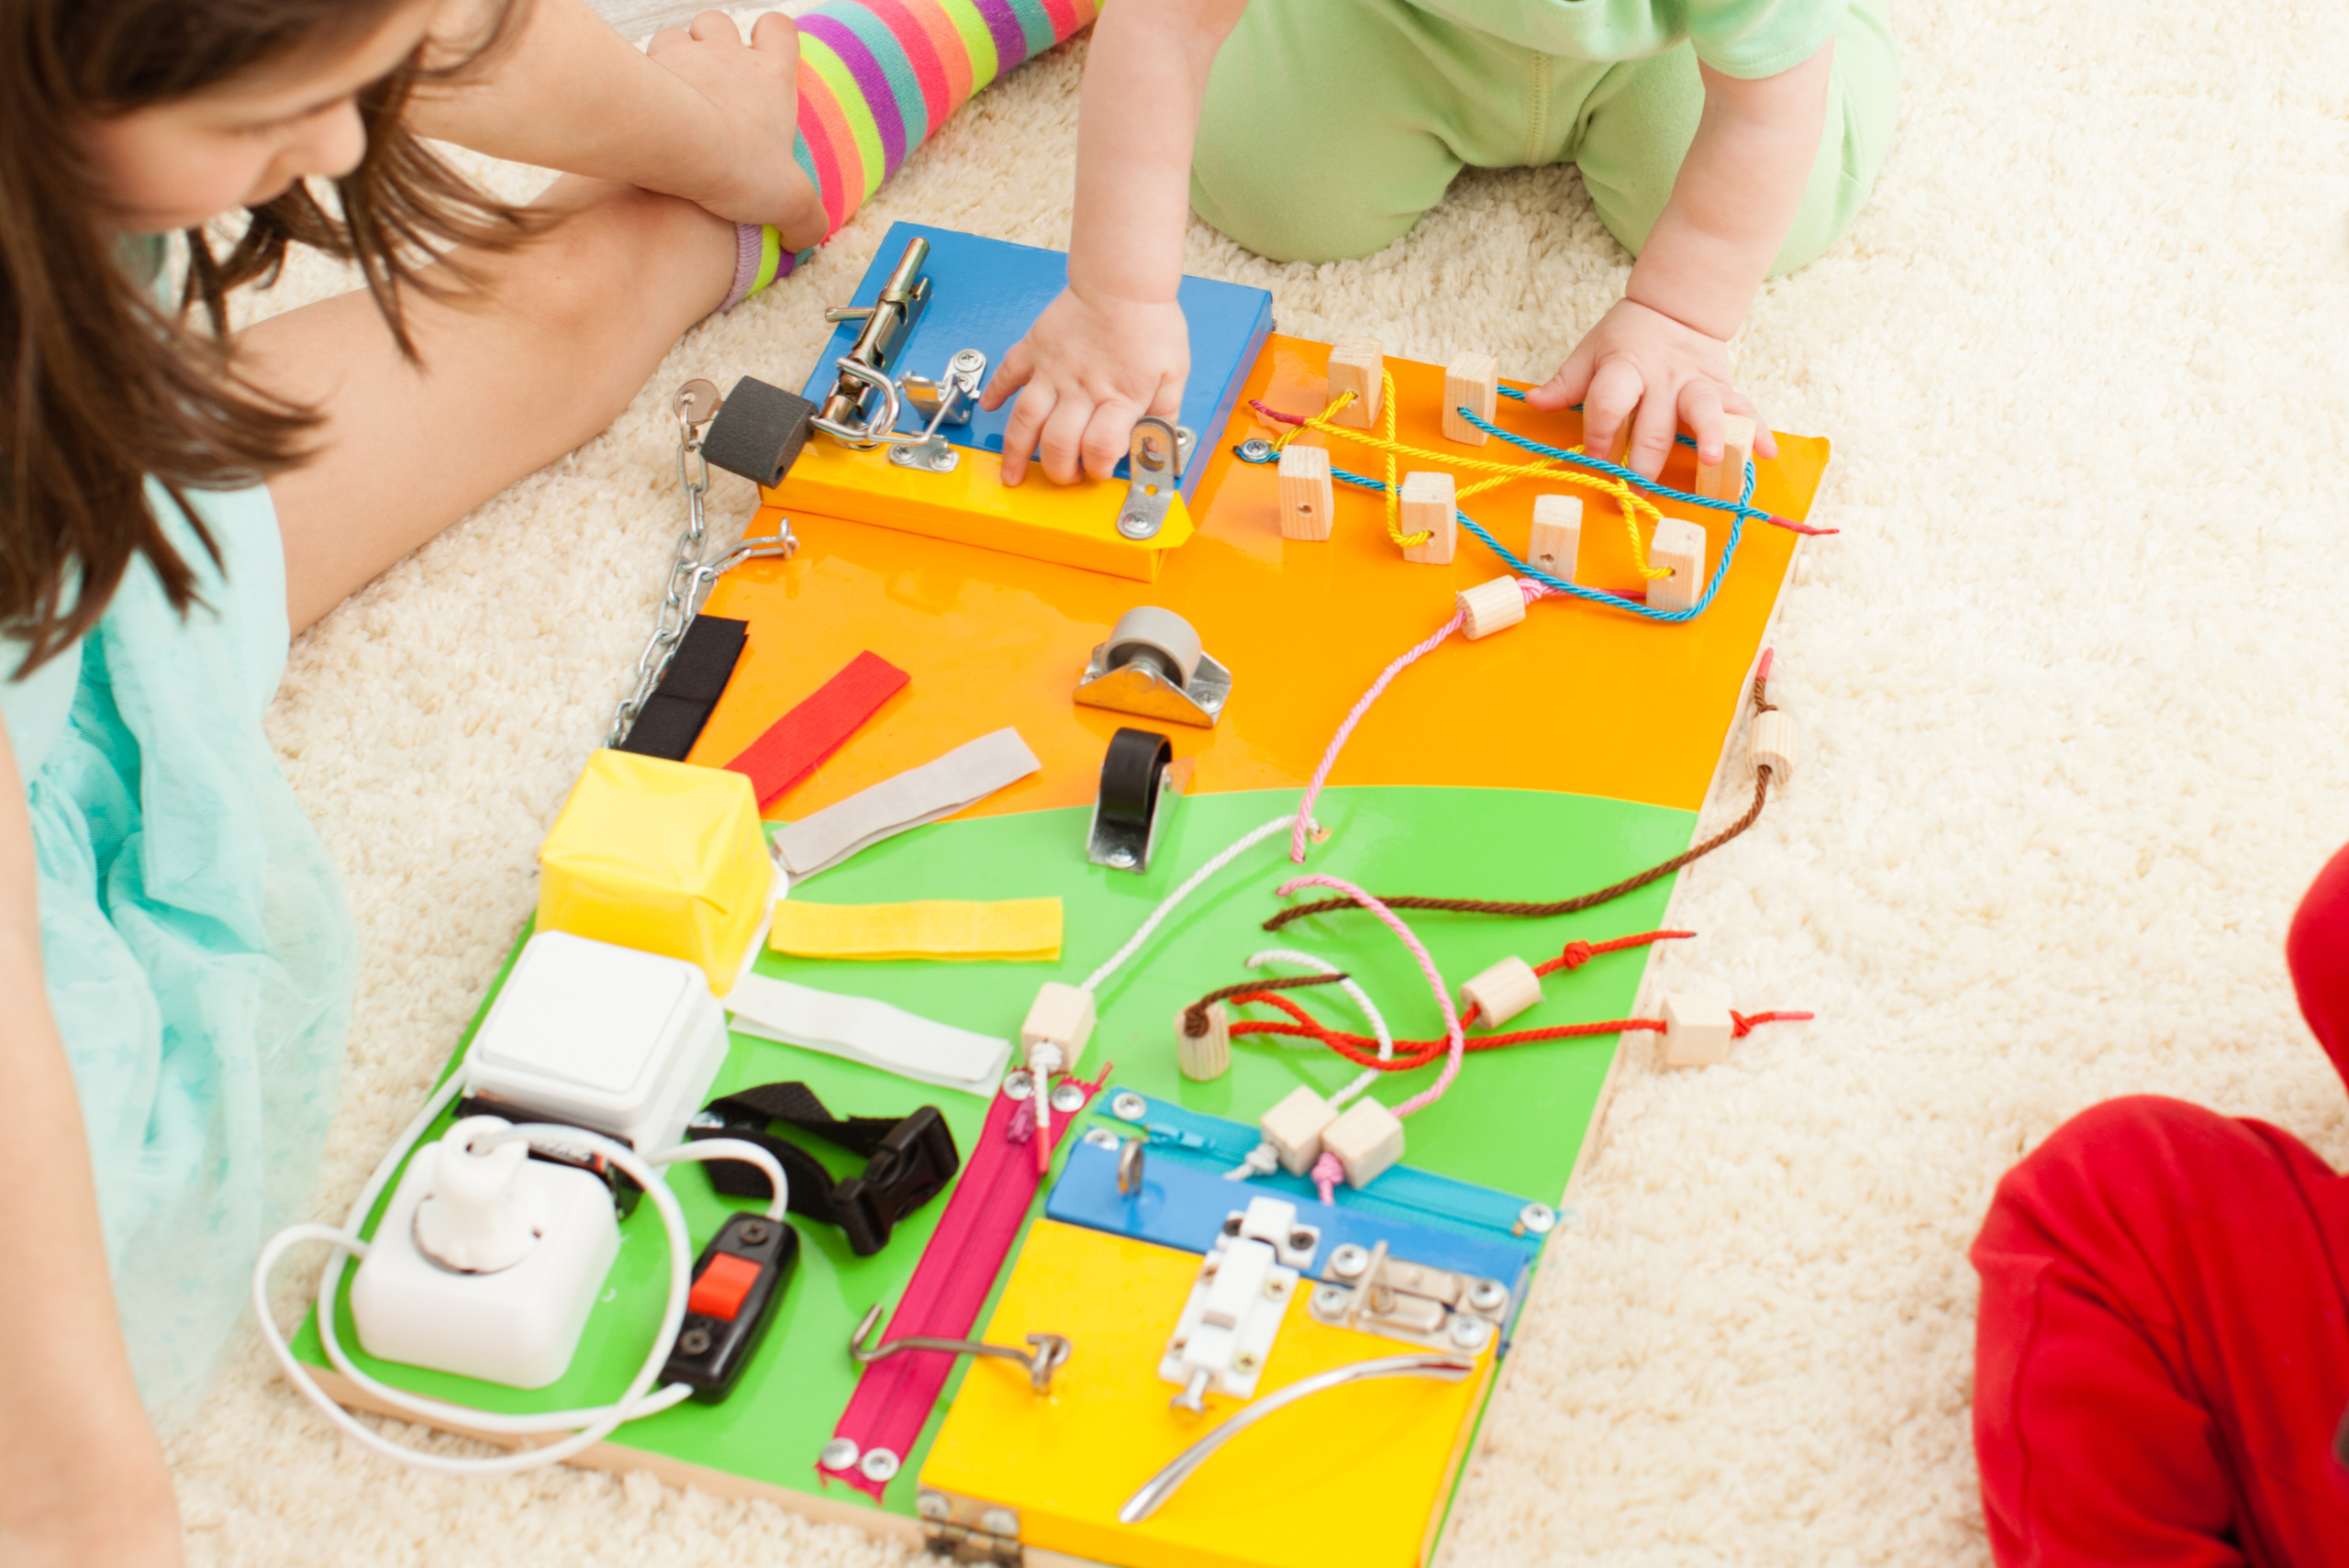 Kids playing with a DIY busy board.